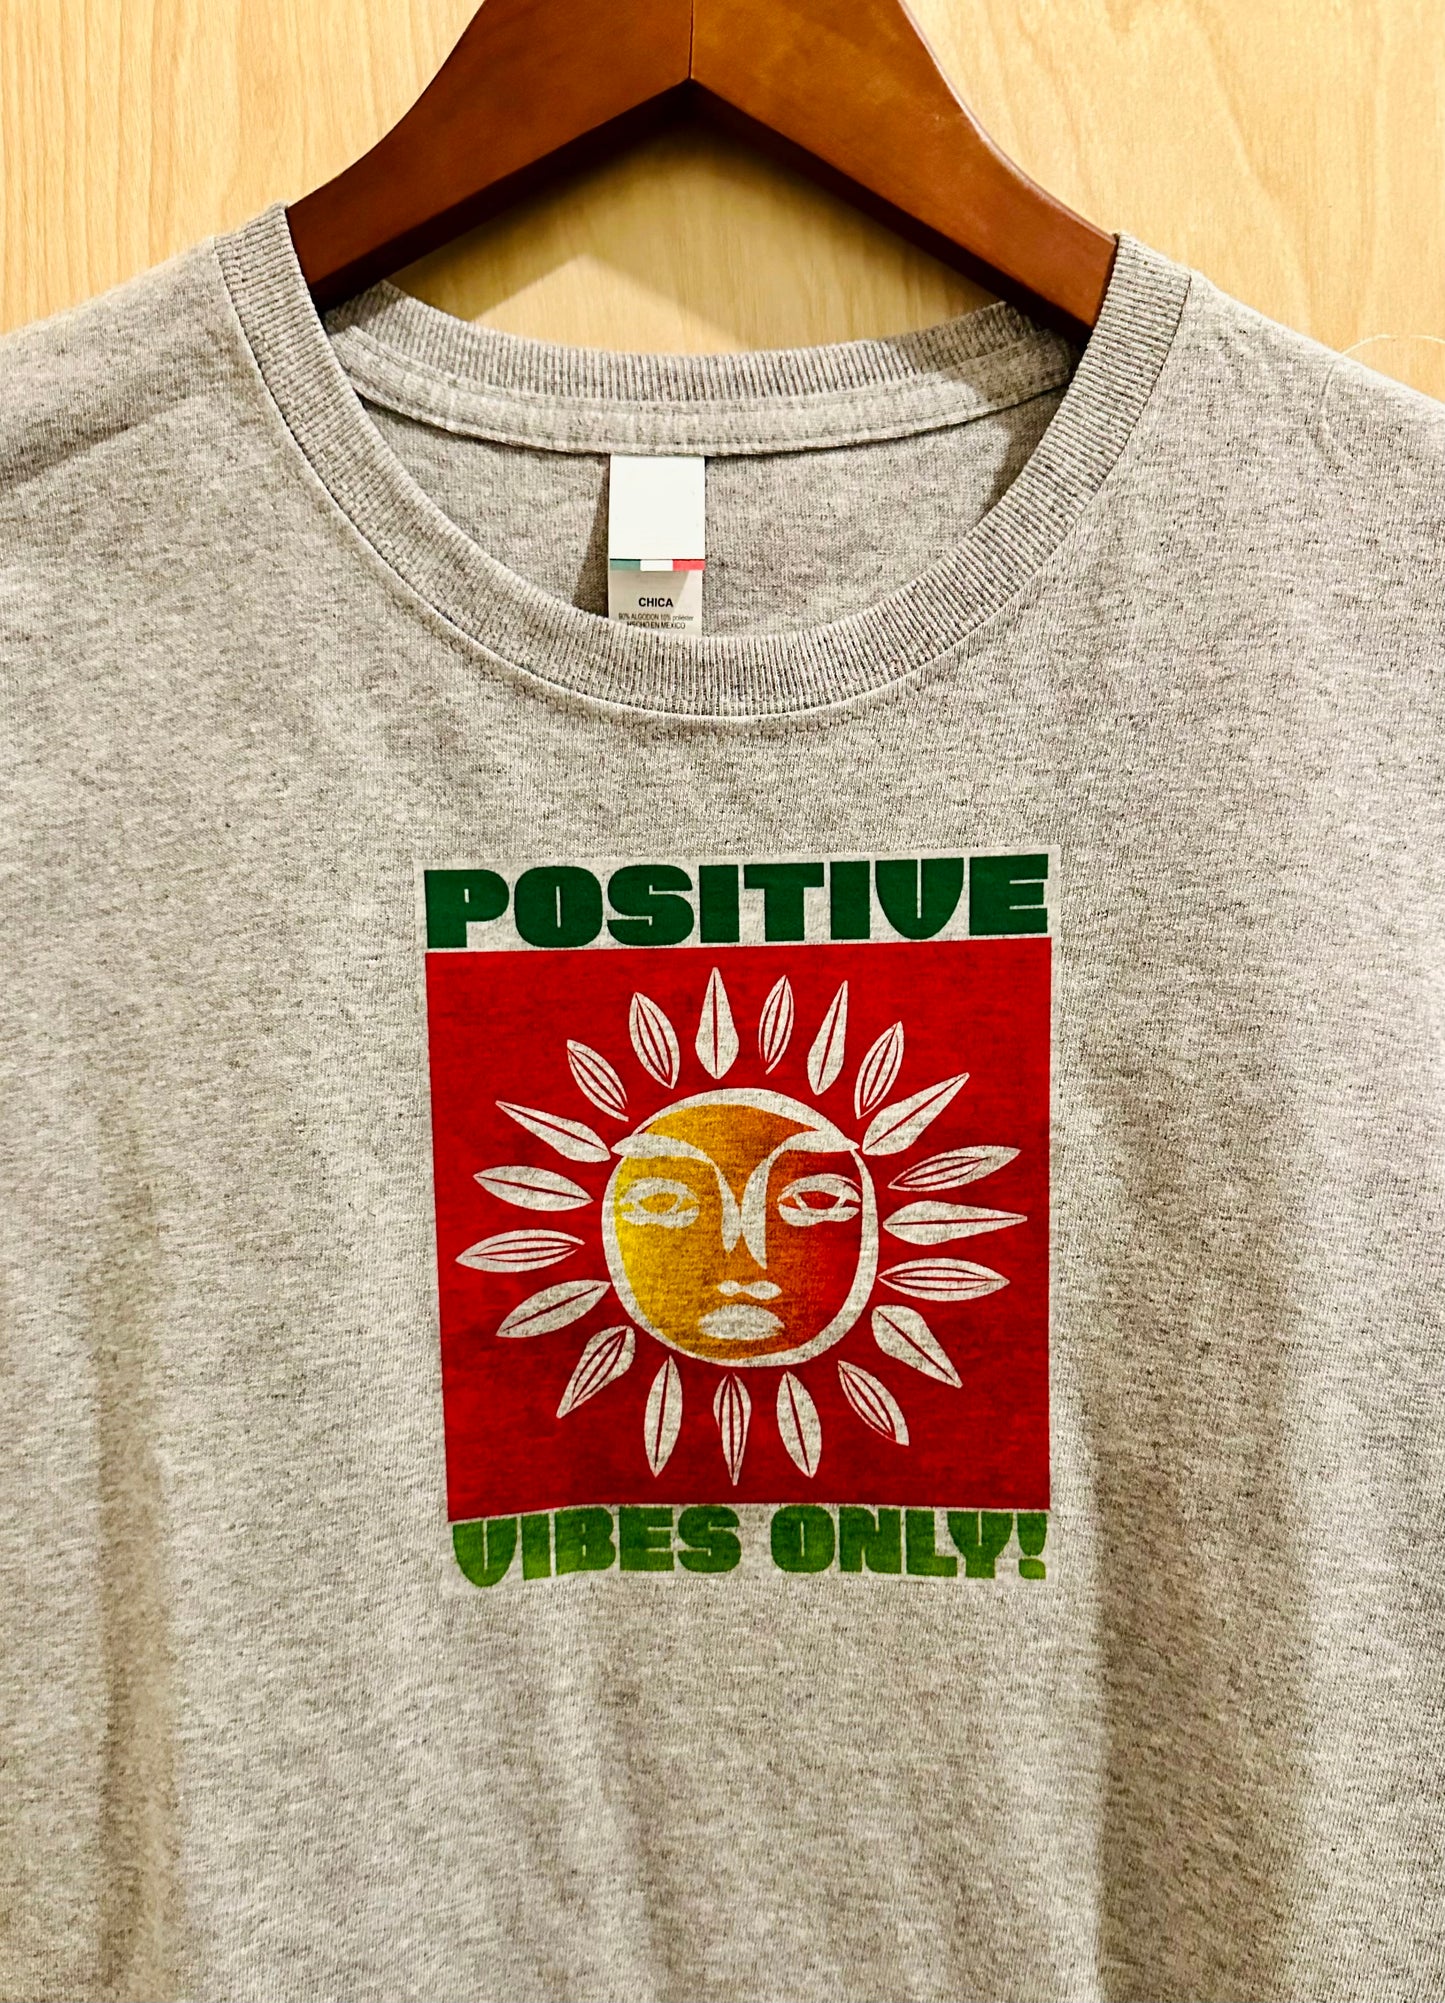 Grey Heather POSITIVE VIBES ONLY Women's Cotton Blend Graphic T-shirt